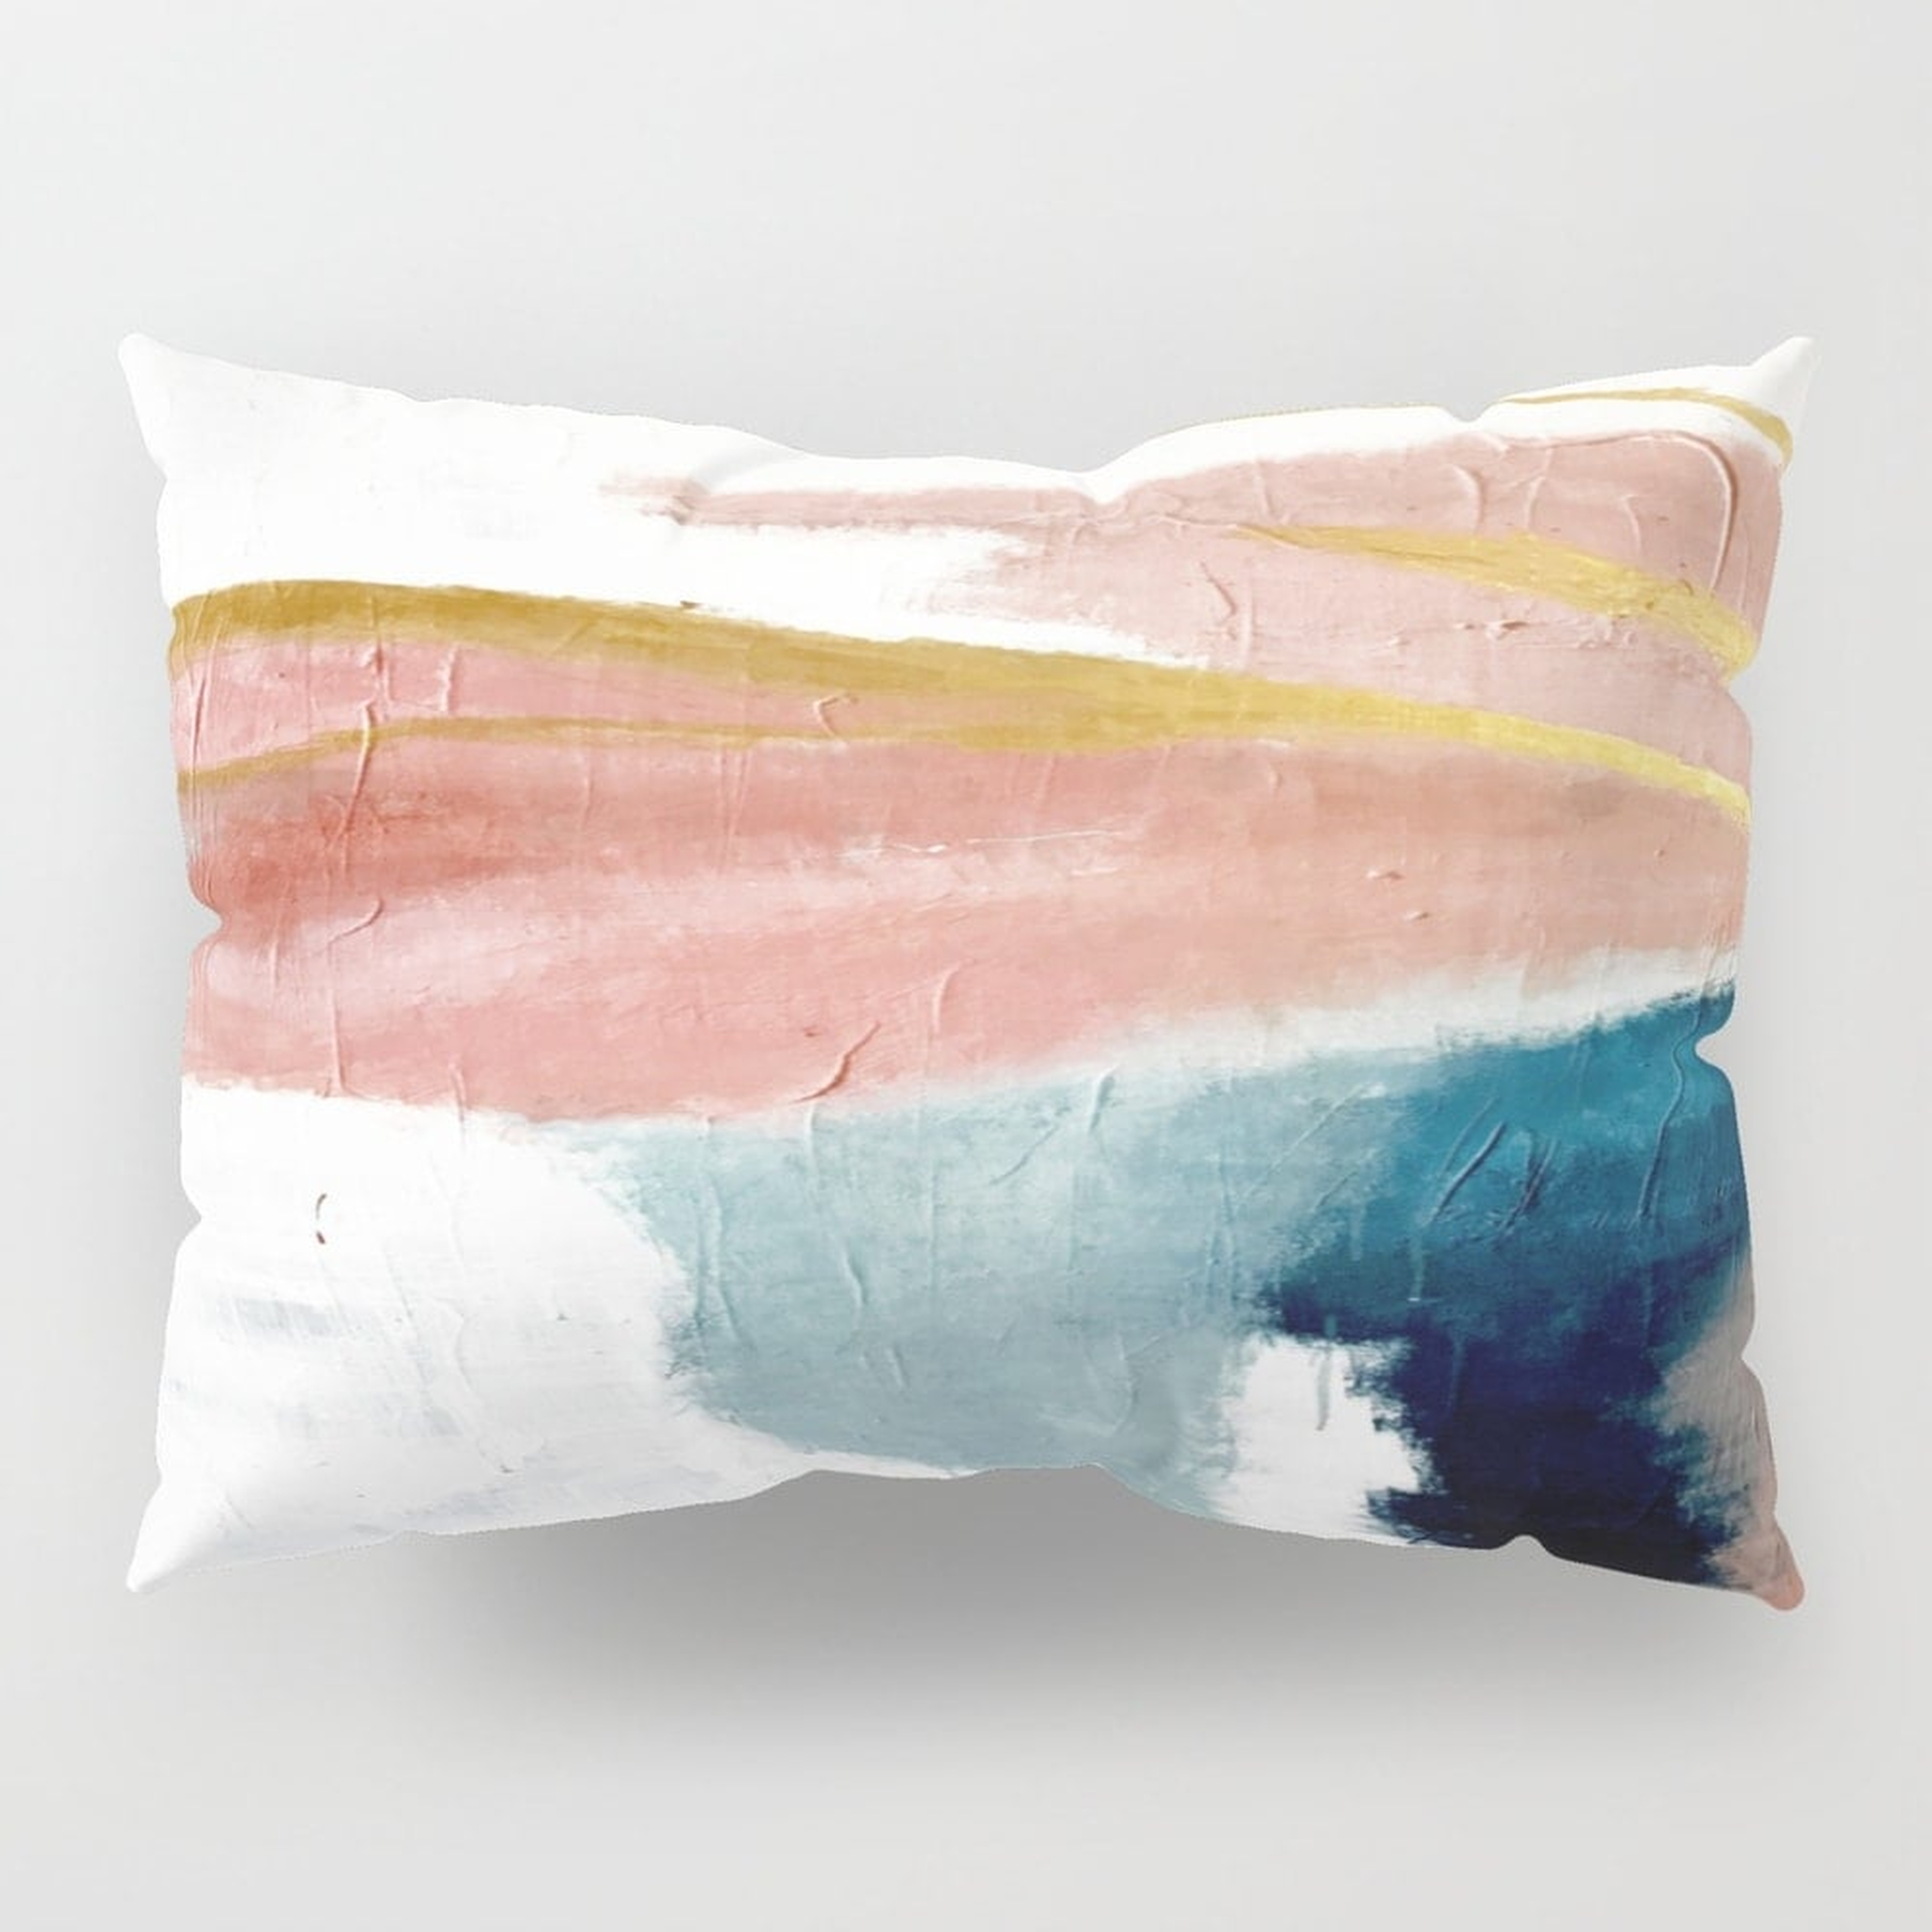 Exhale: A Pretty, Minimal, Acrylic Piece In Pinks, Pillow Shams - Standard Set of 2 - Society6